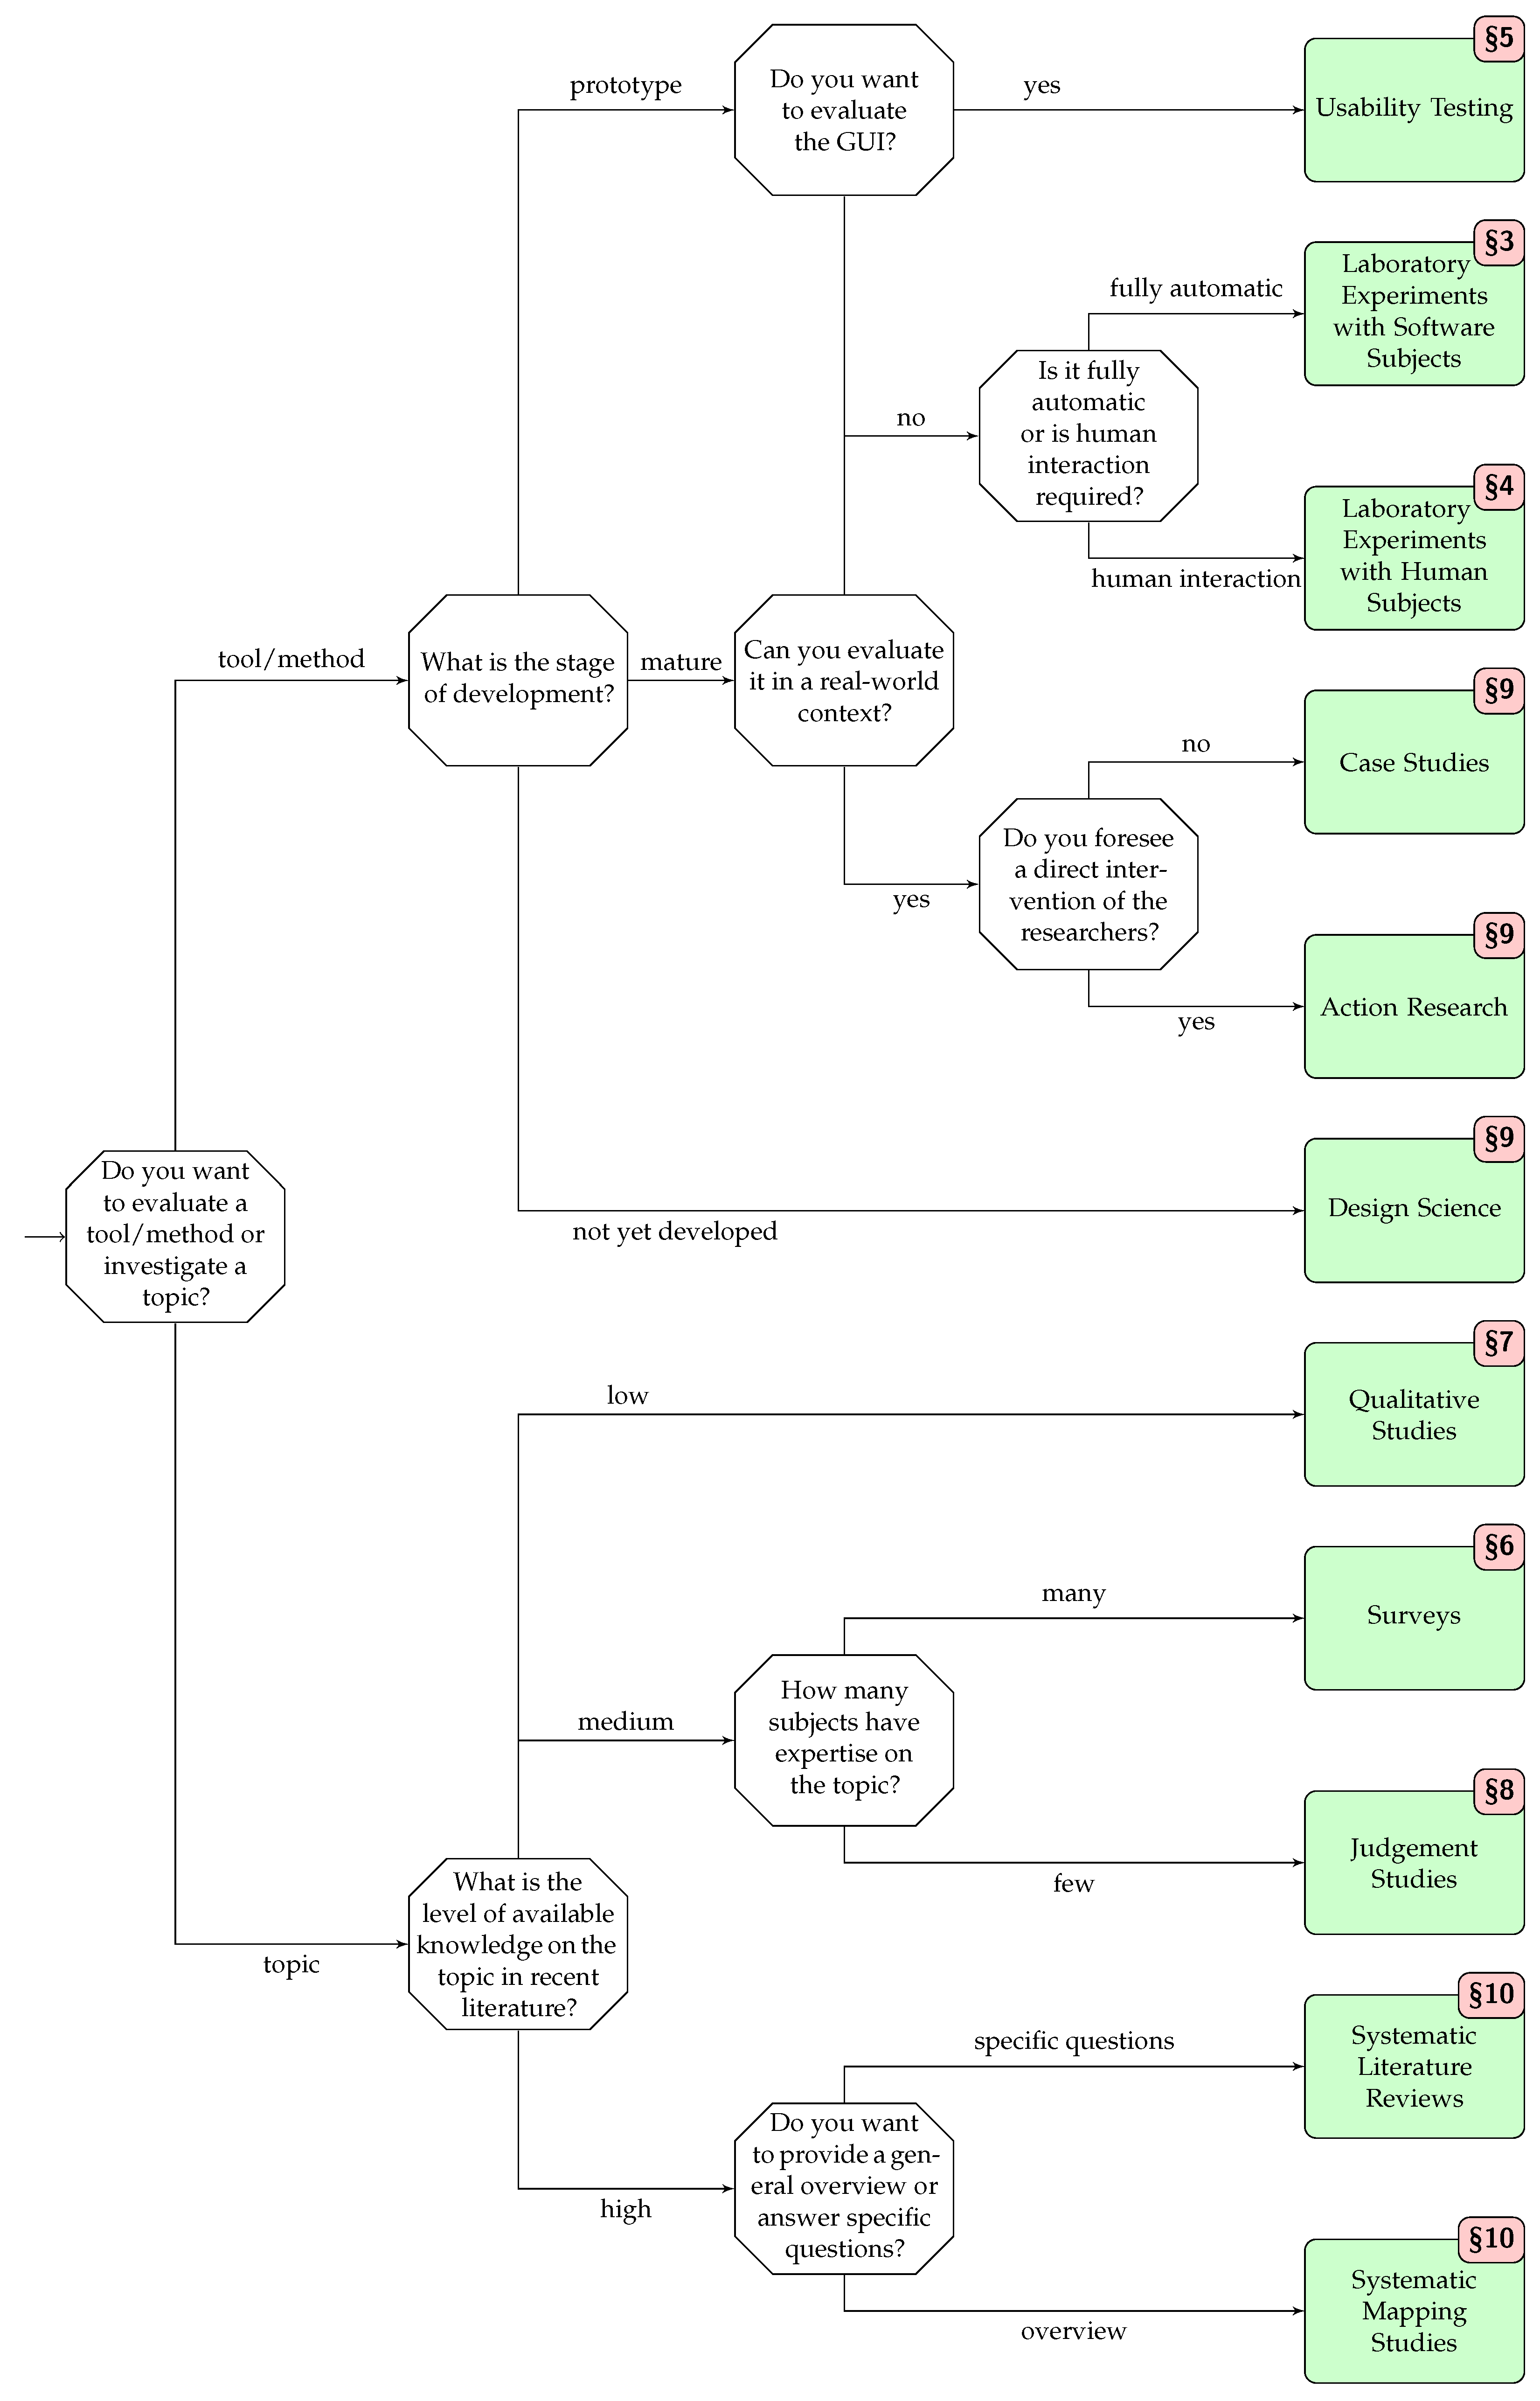 Overview of research method, based on Stol and Fitzgerald [41]. Grey